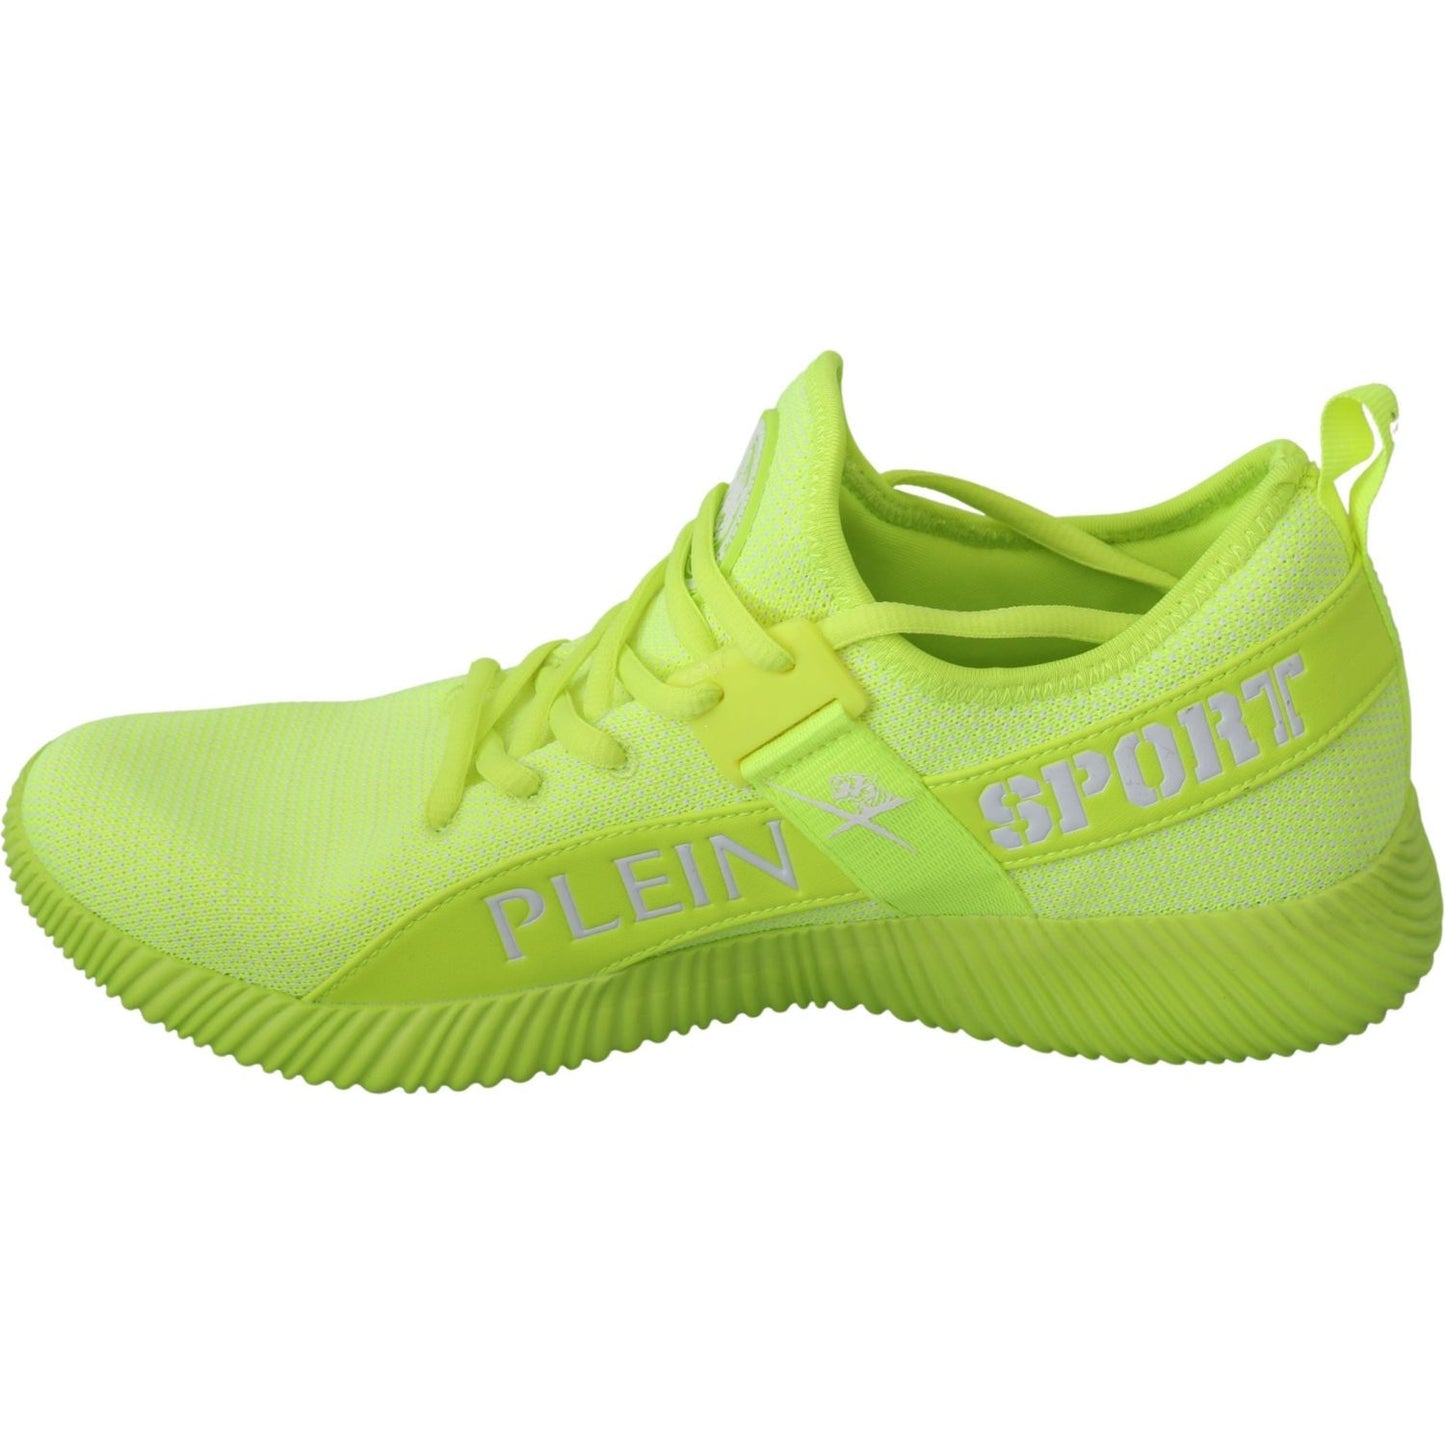 Philipp Plein Stylish Light Green Casual Sneakers MAN SNEAKERS green-carter-logo-hi-top-sneakers-shoes IMG_7547-scaled-d1fe7d7c-d2f.jpg